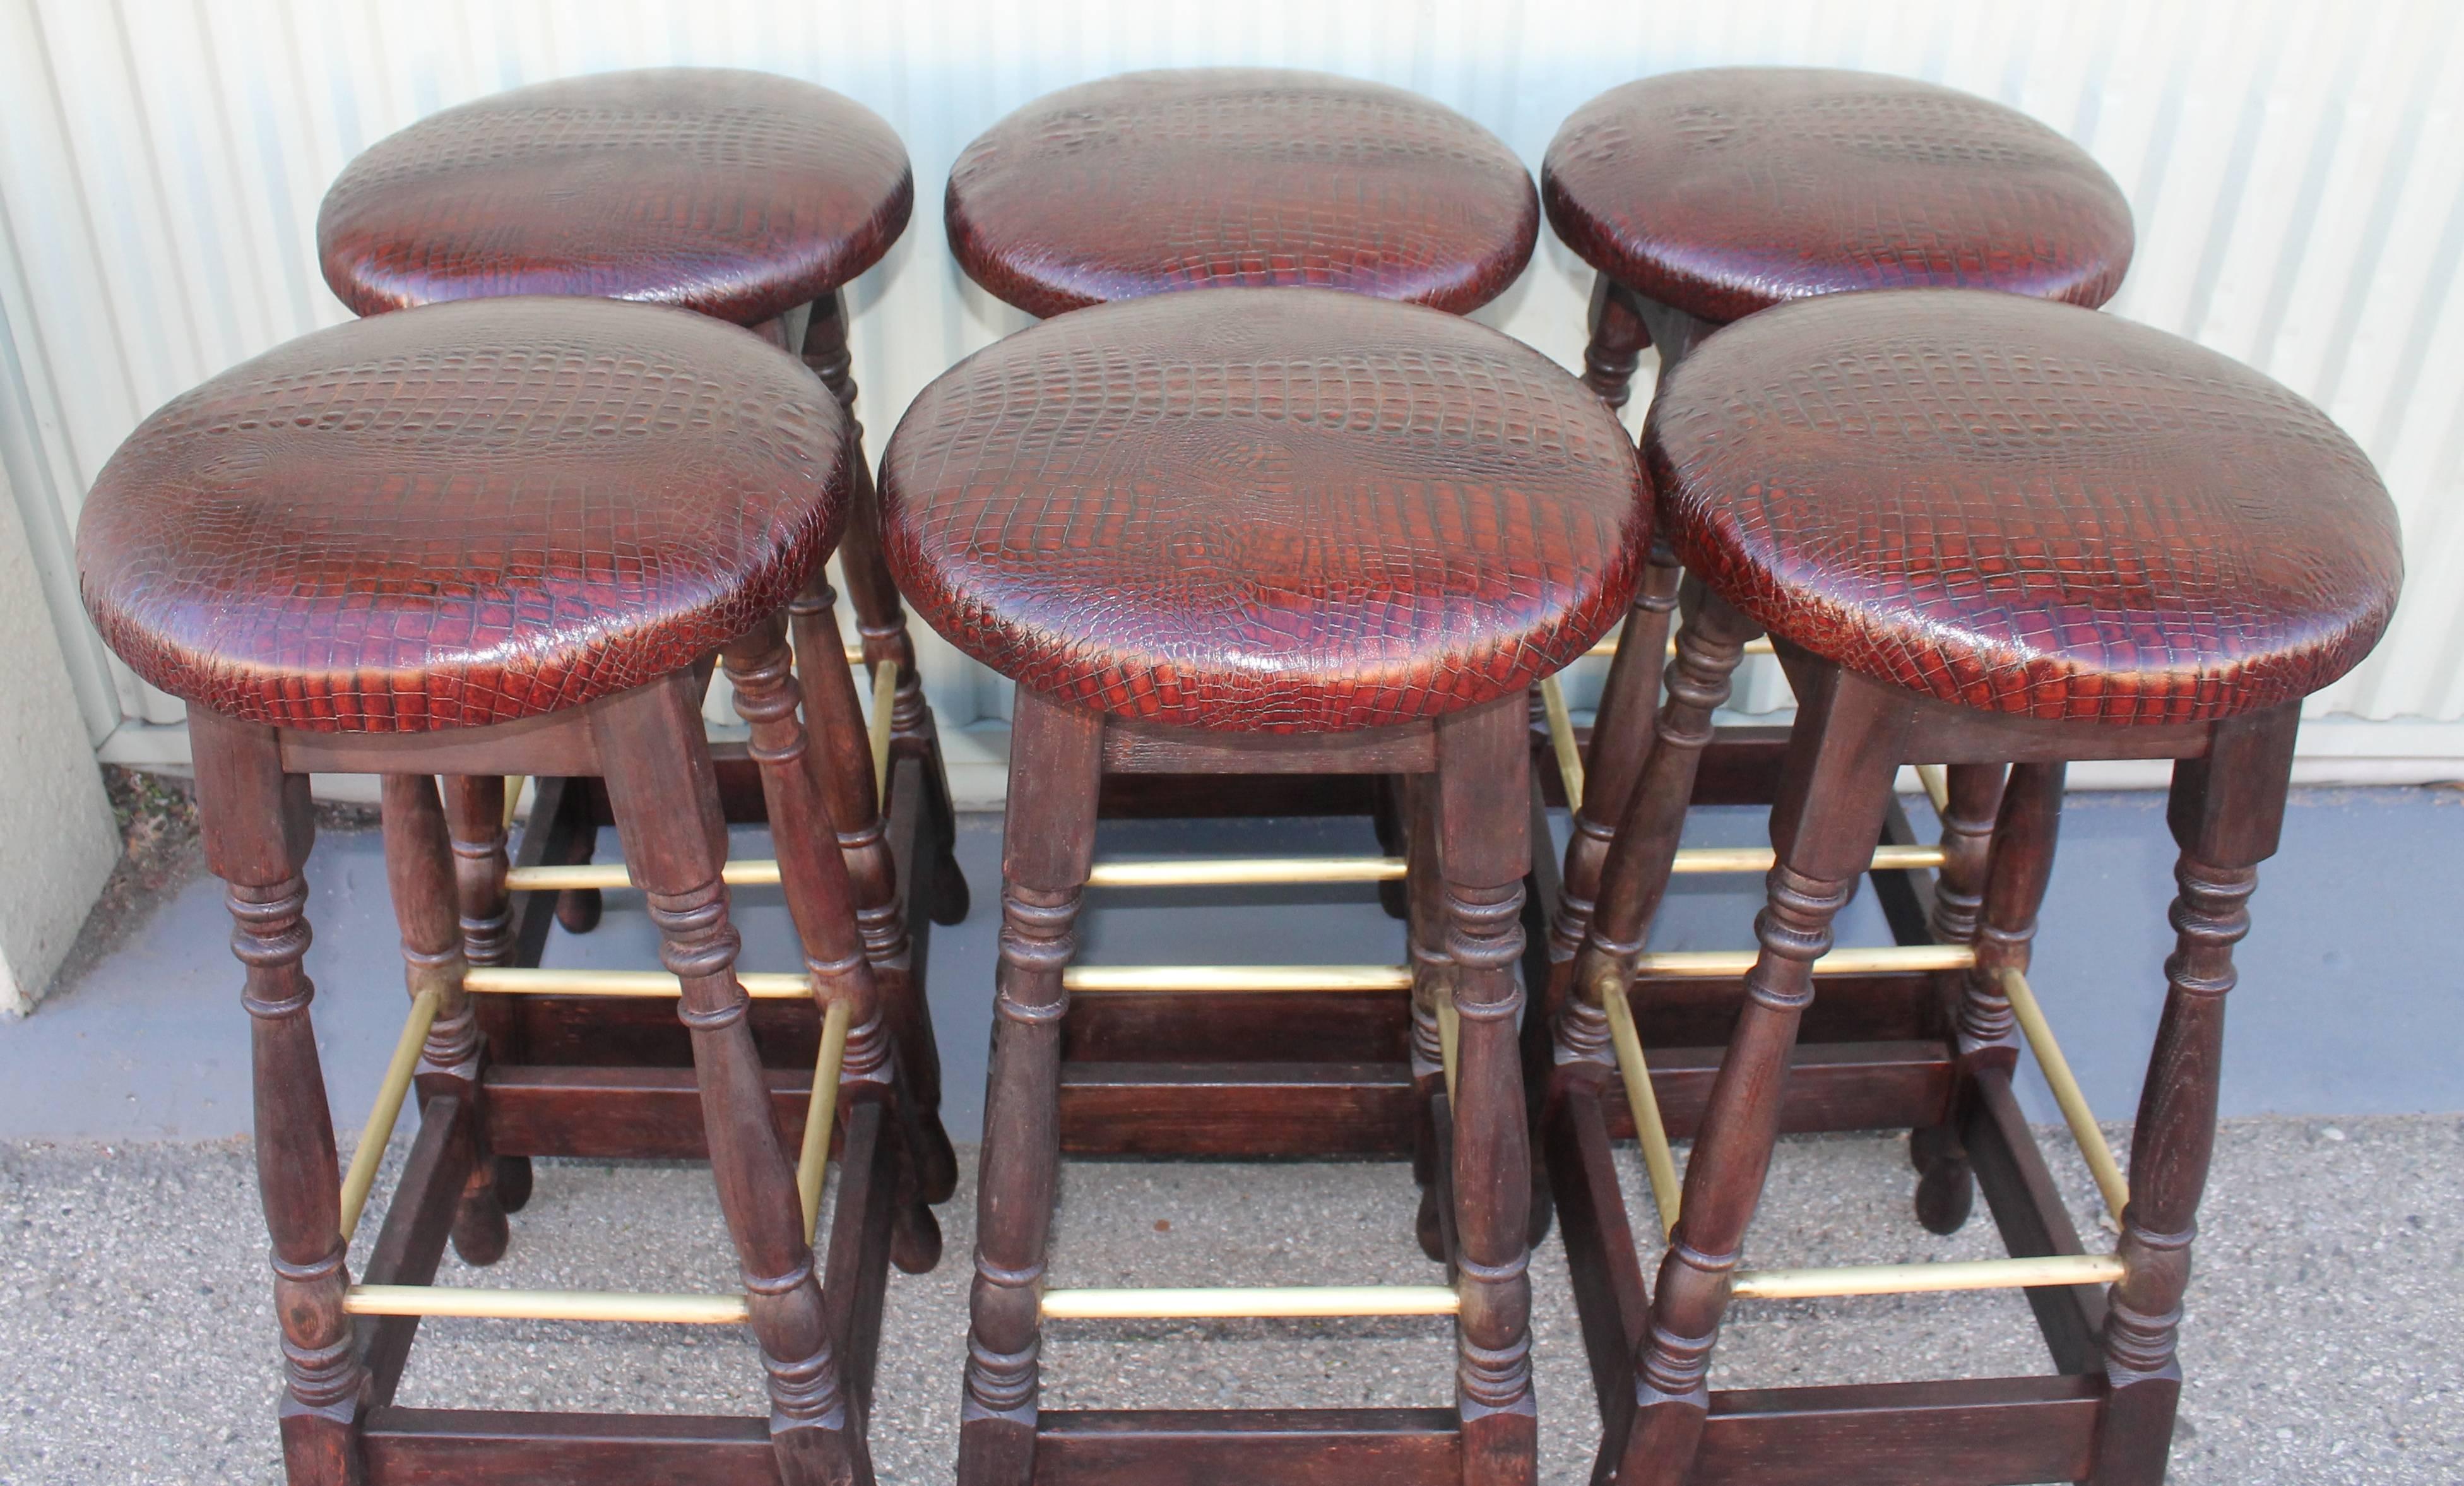 Stained Set of Six Mid-Century Bar Stools Upholstered in Faux Alligator Leather